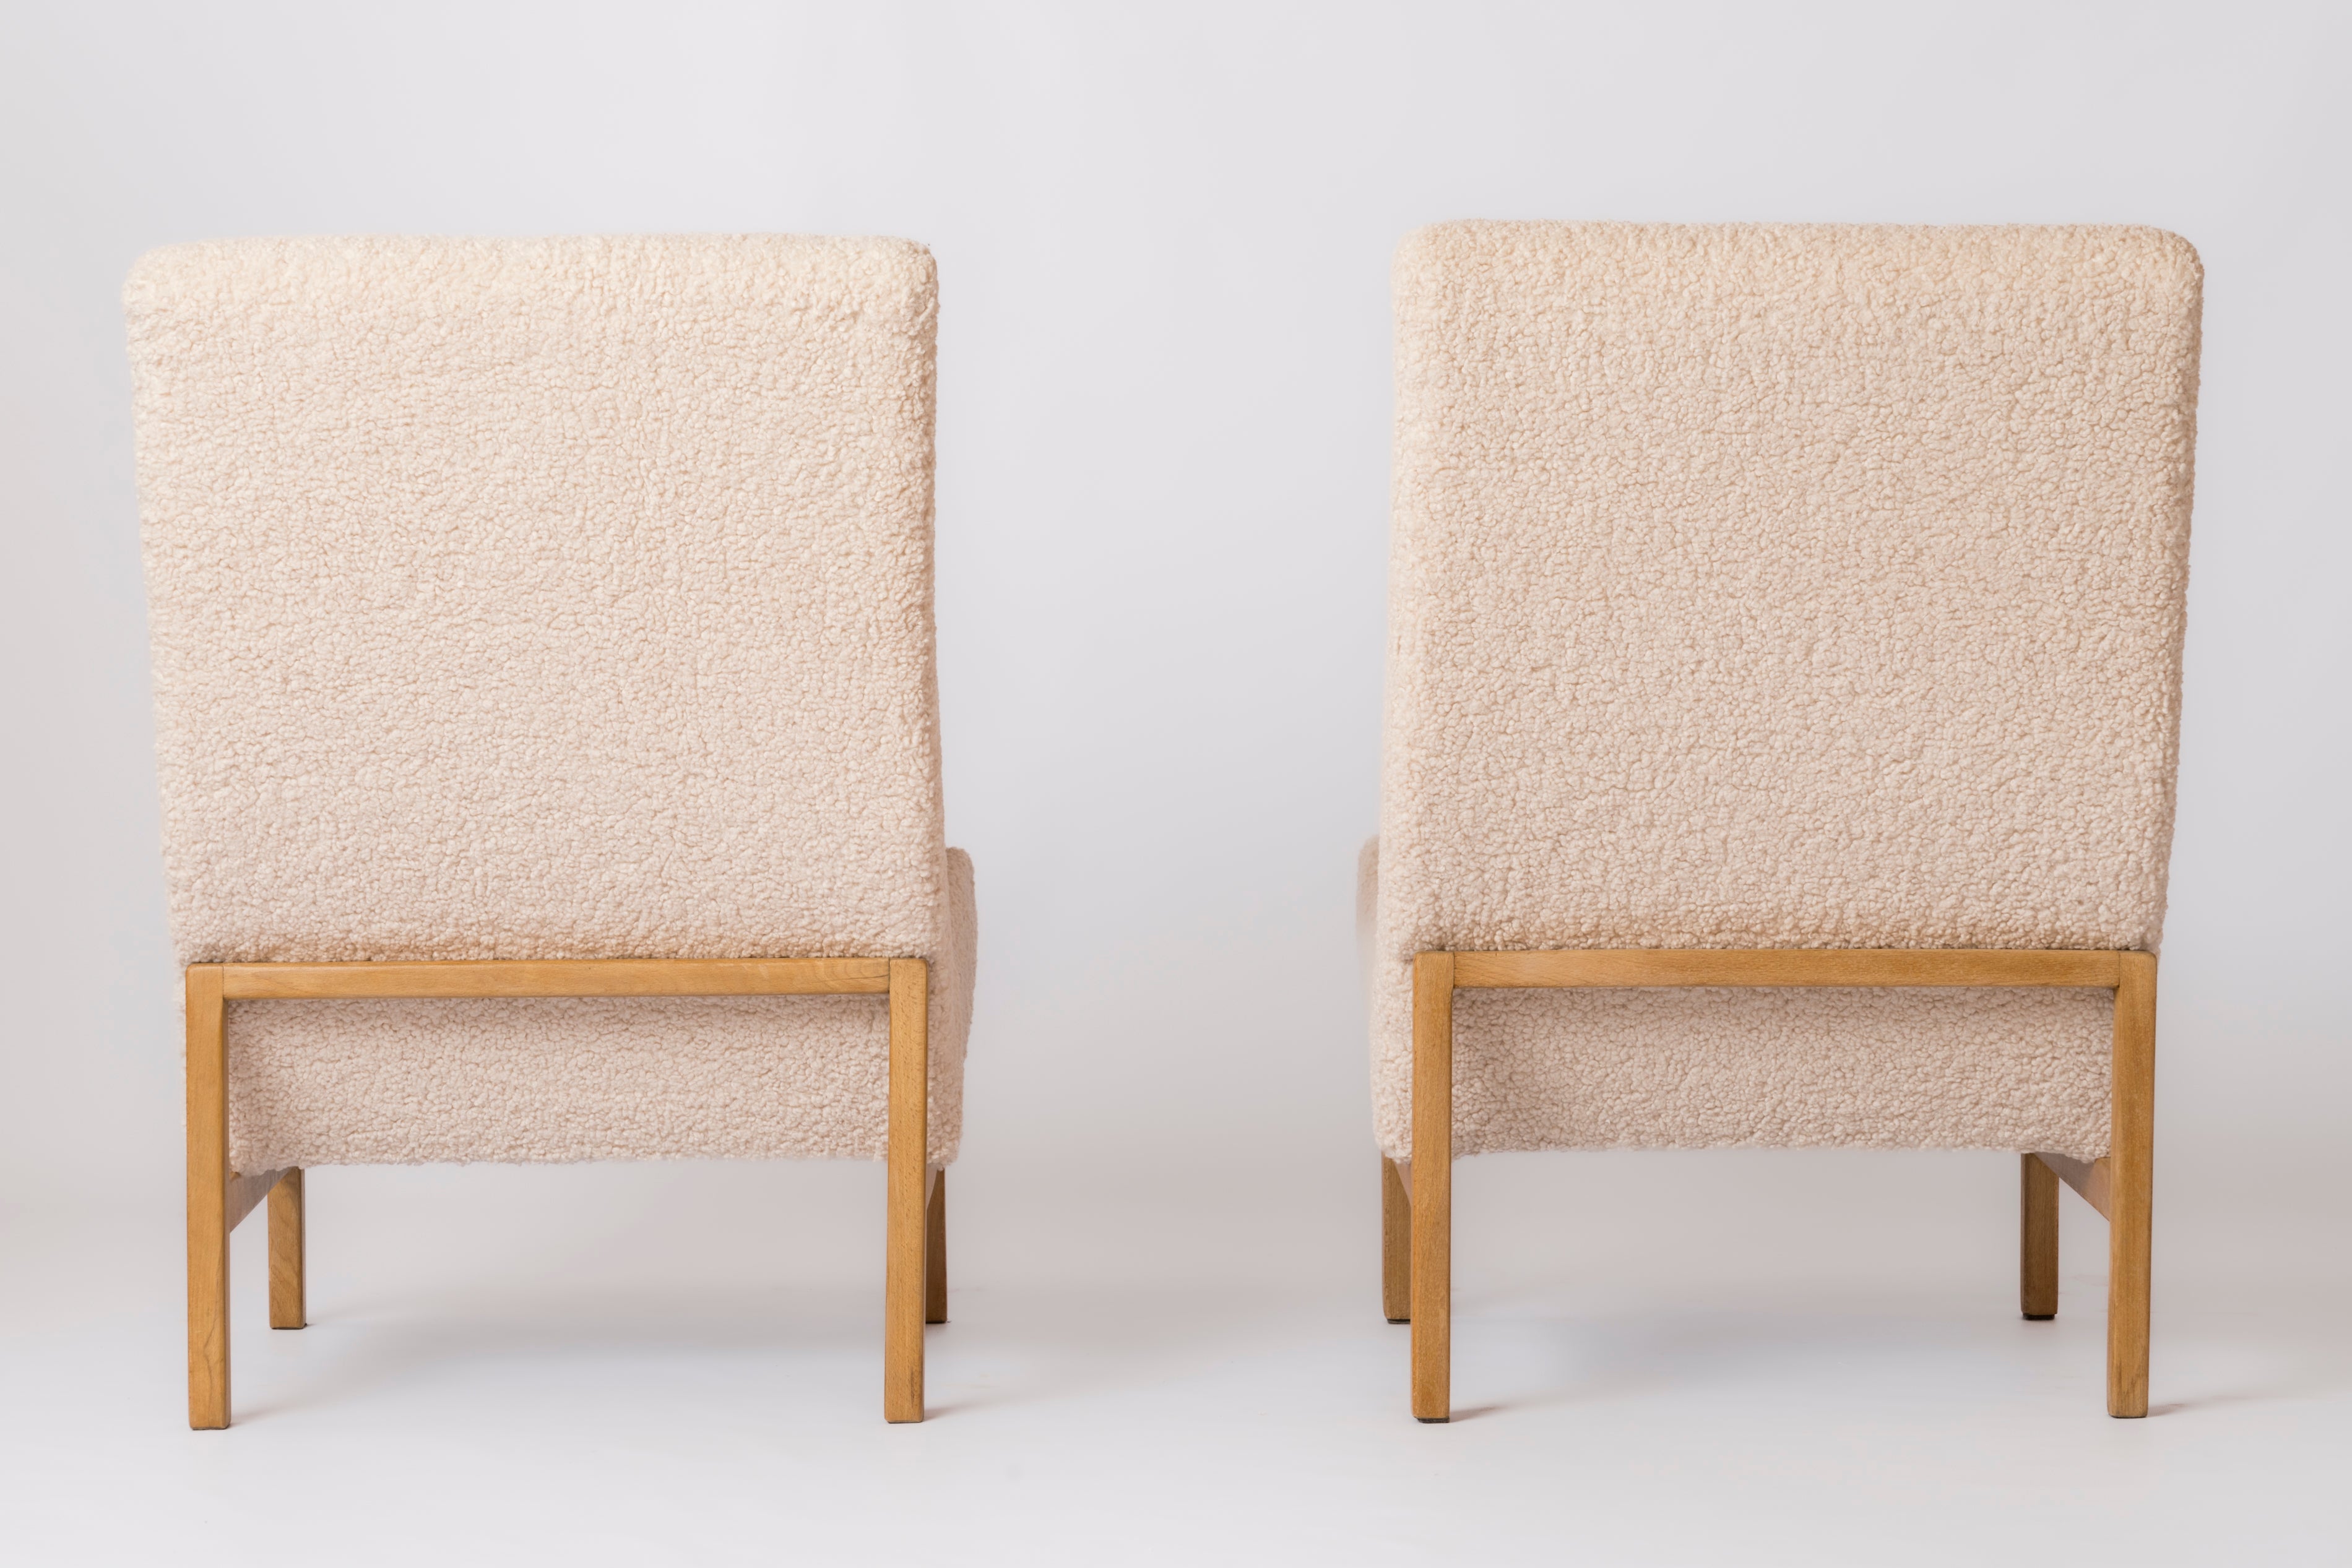 Ash & Cream Boucle Chairs by Guariche, Mortier, Motte for ARP, France, 1955